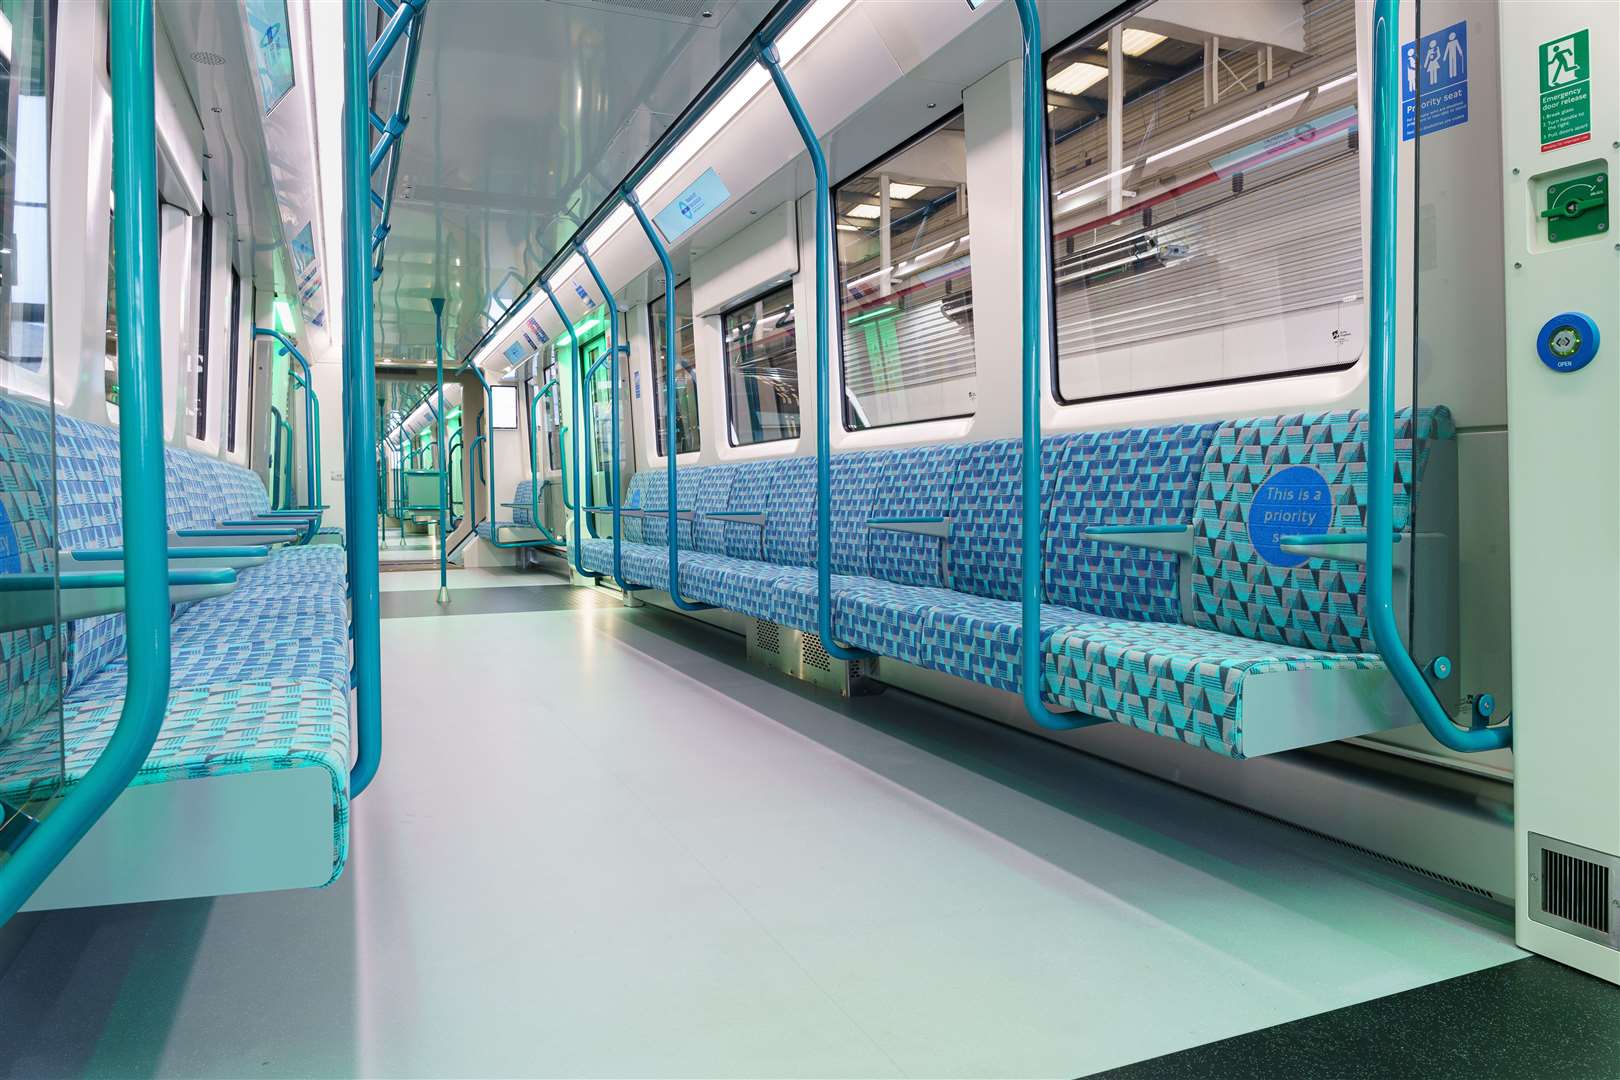 Passengers will be able to travel through the length of the carriage